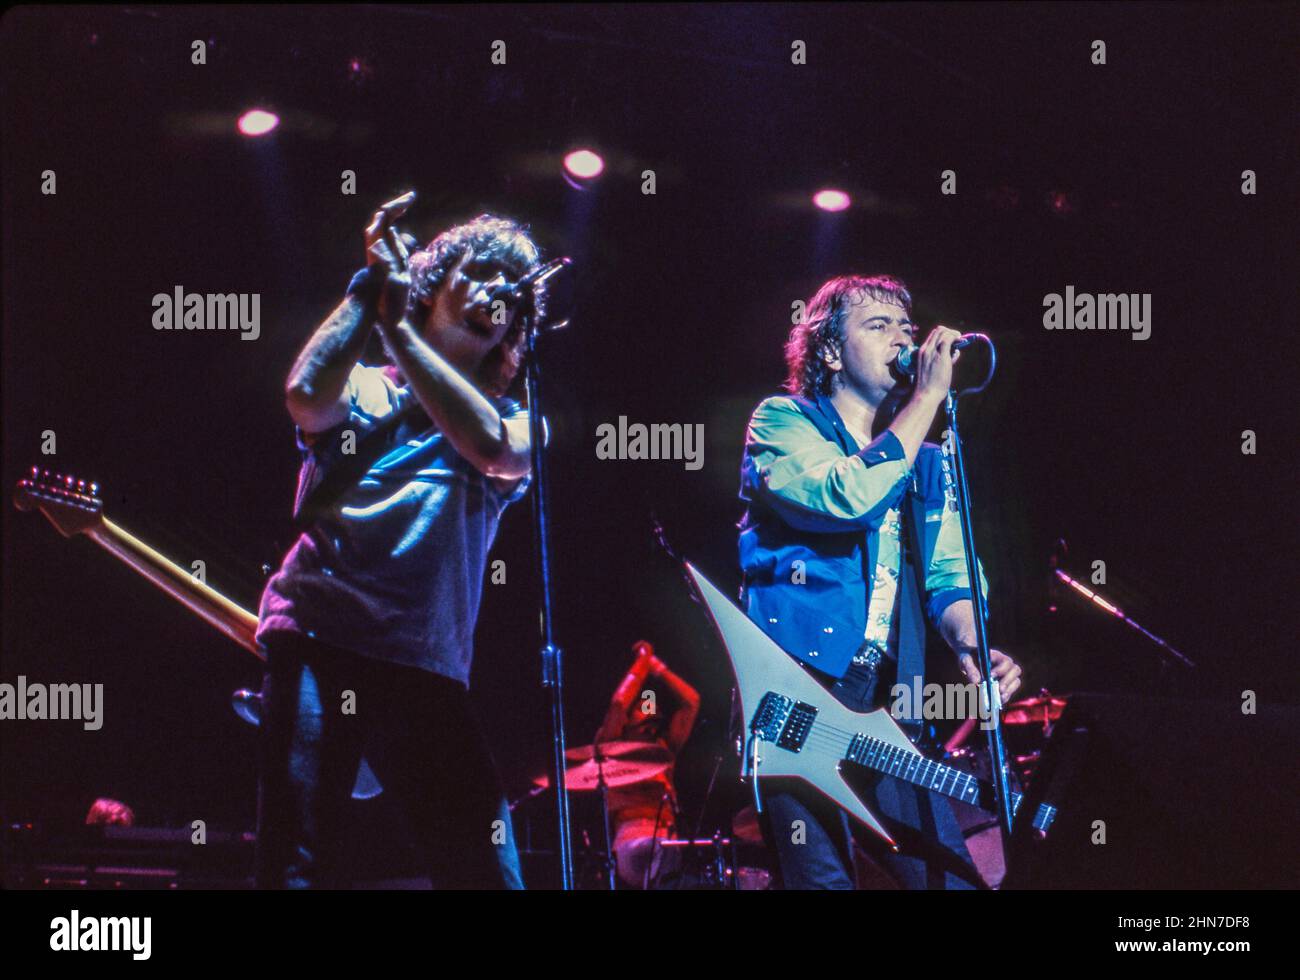 Bob Mayo and Mick Jones of Anglo-American band Foreigner performing at Wembley Arena, London in 1985. Stock Photo